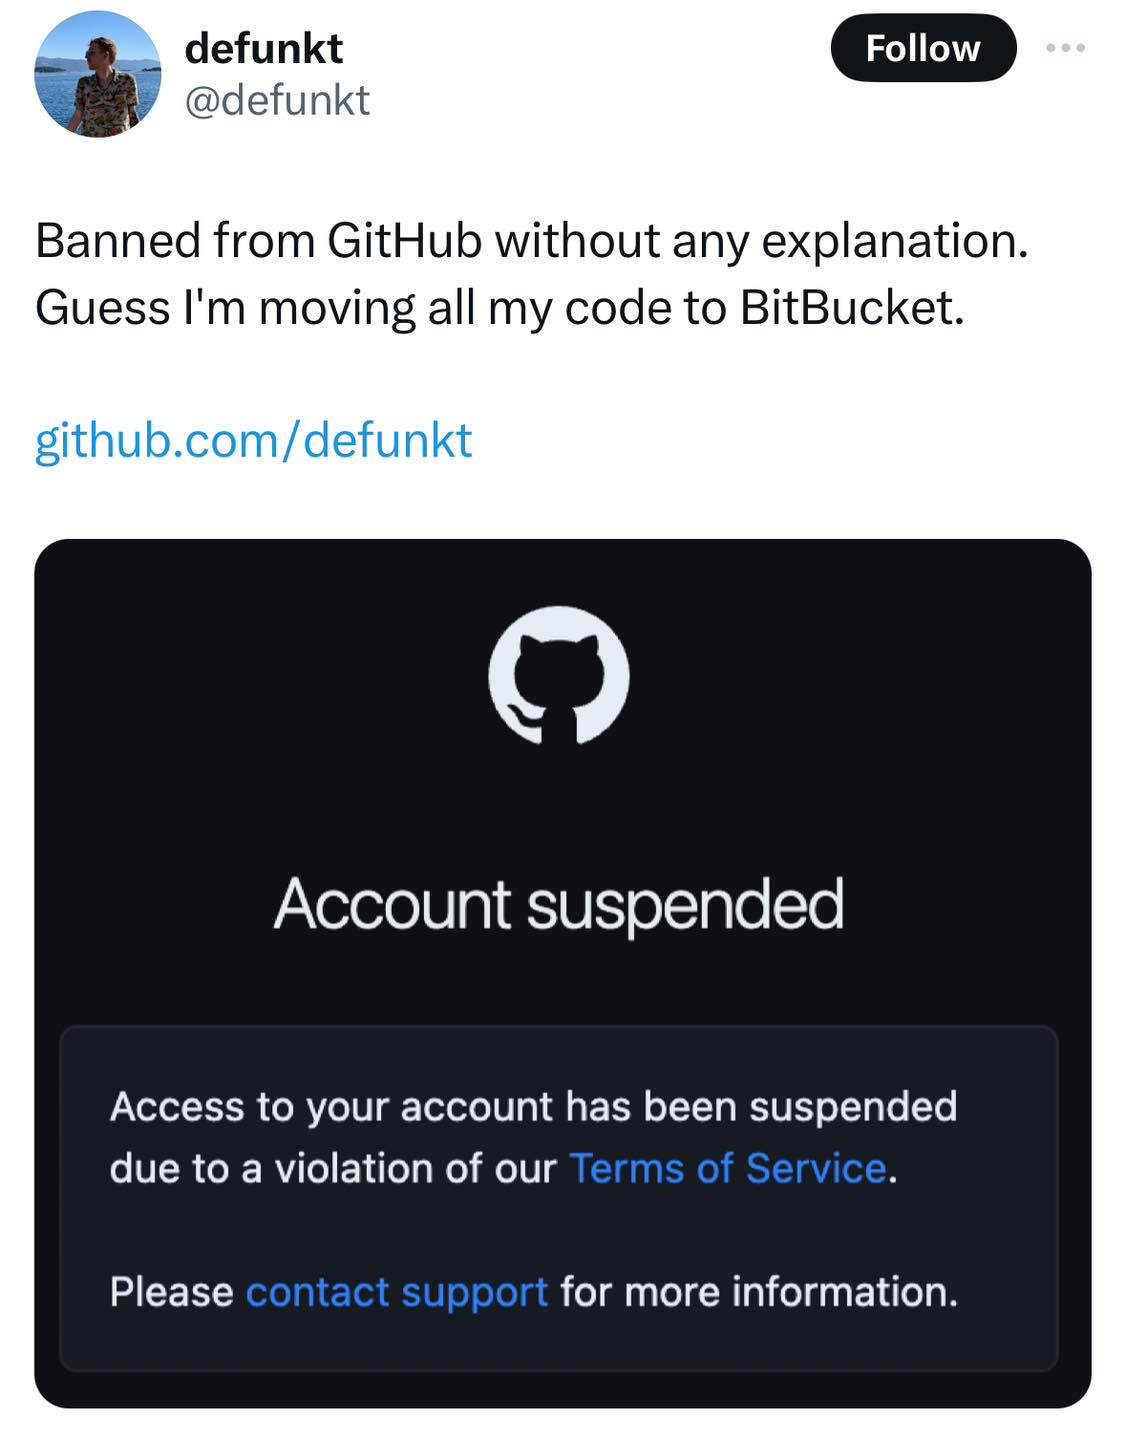 Github banned its cofounder due to bug or AI-based automation